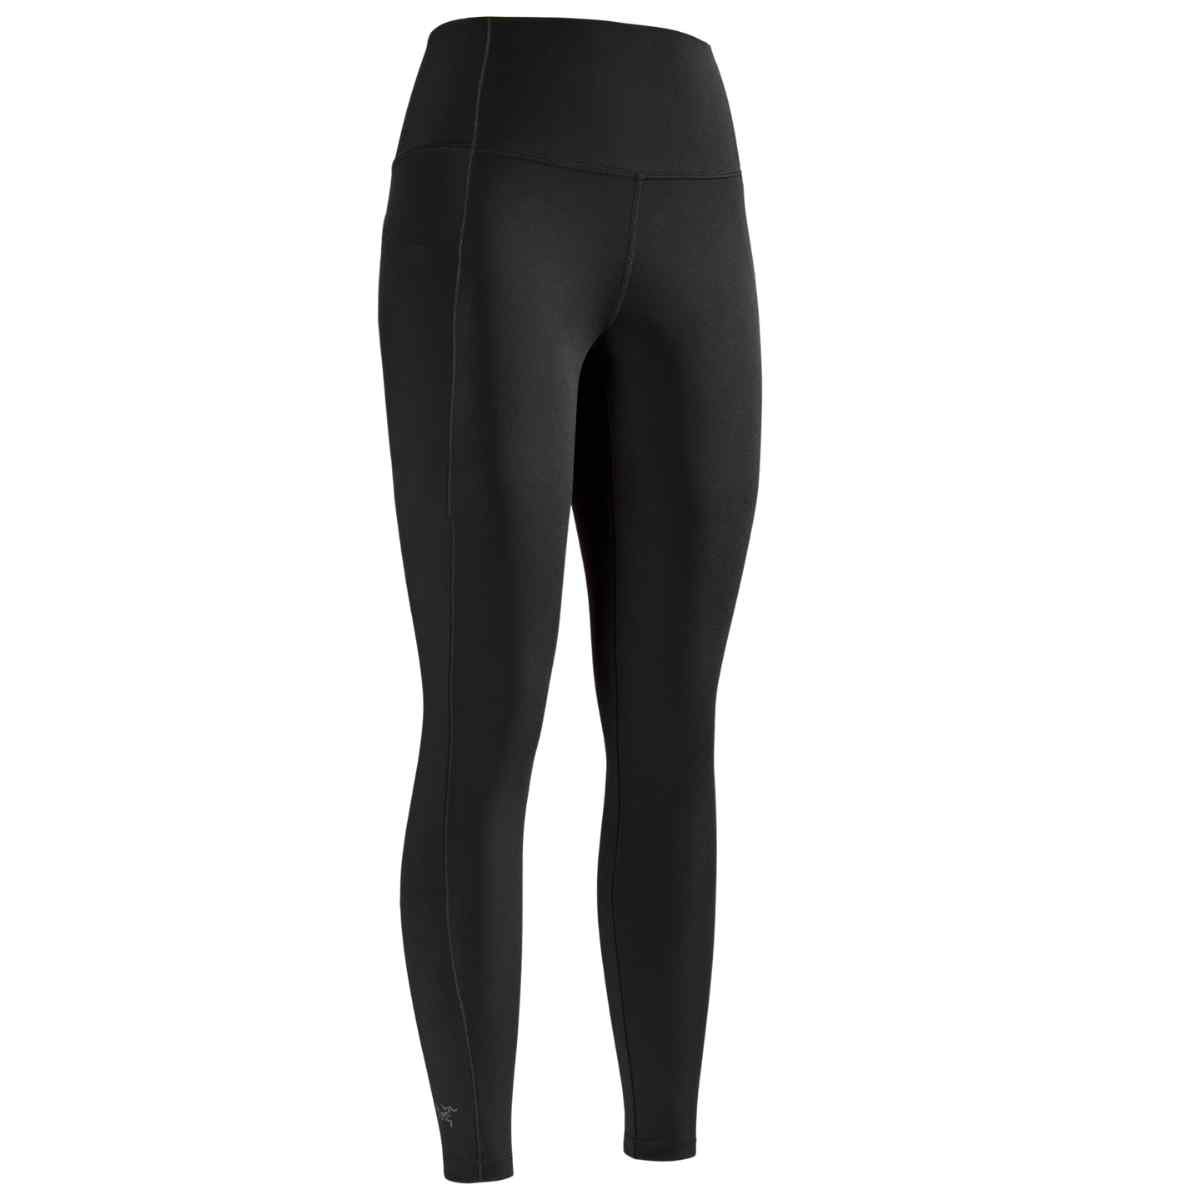 7 Most Comfy Women's Hiking Leggings of 2022: Year-Round & Winter